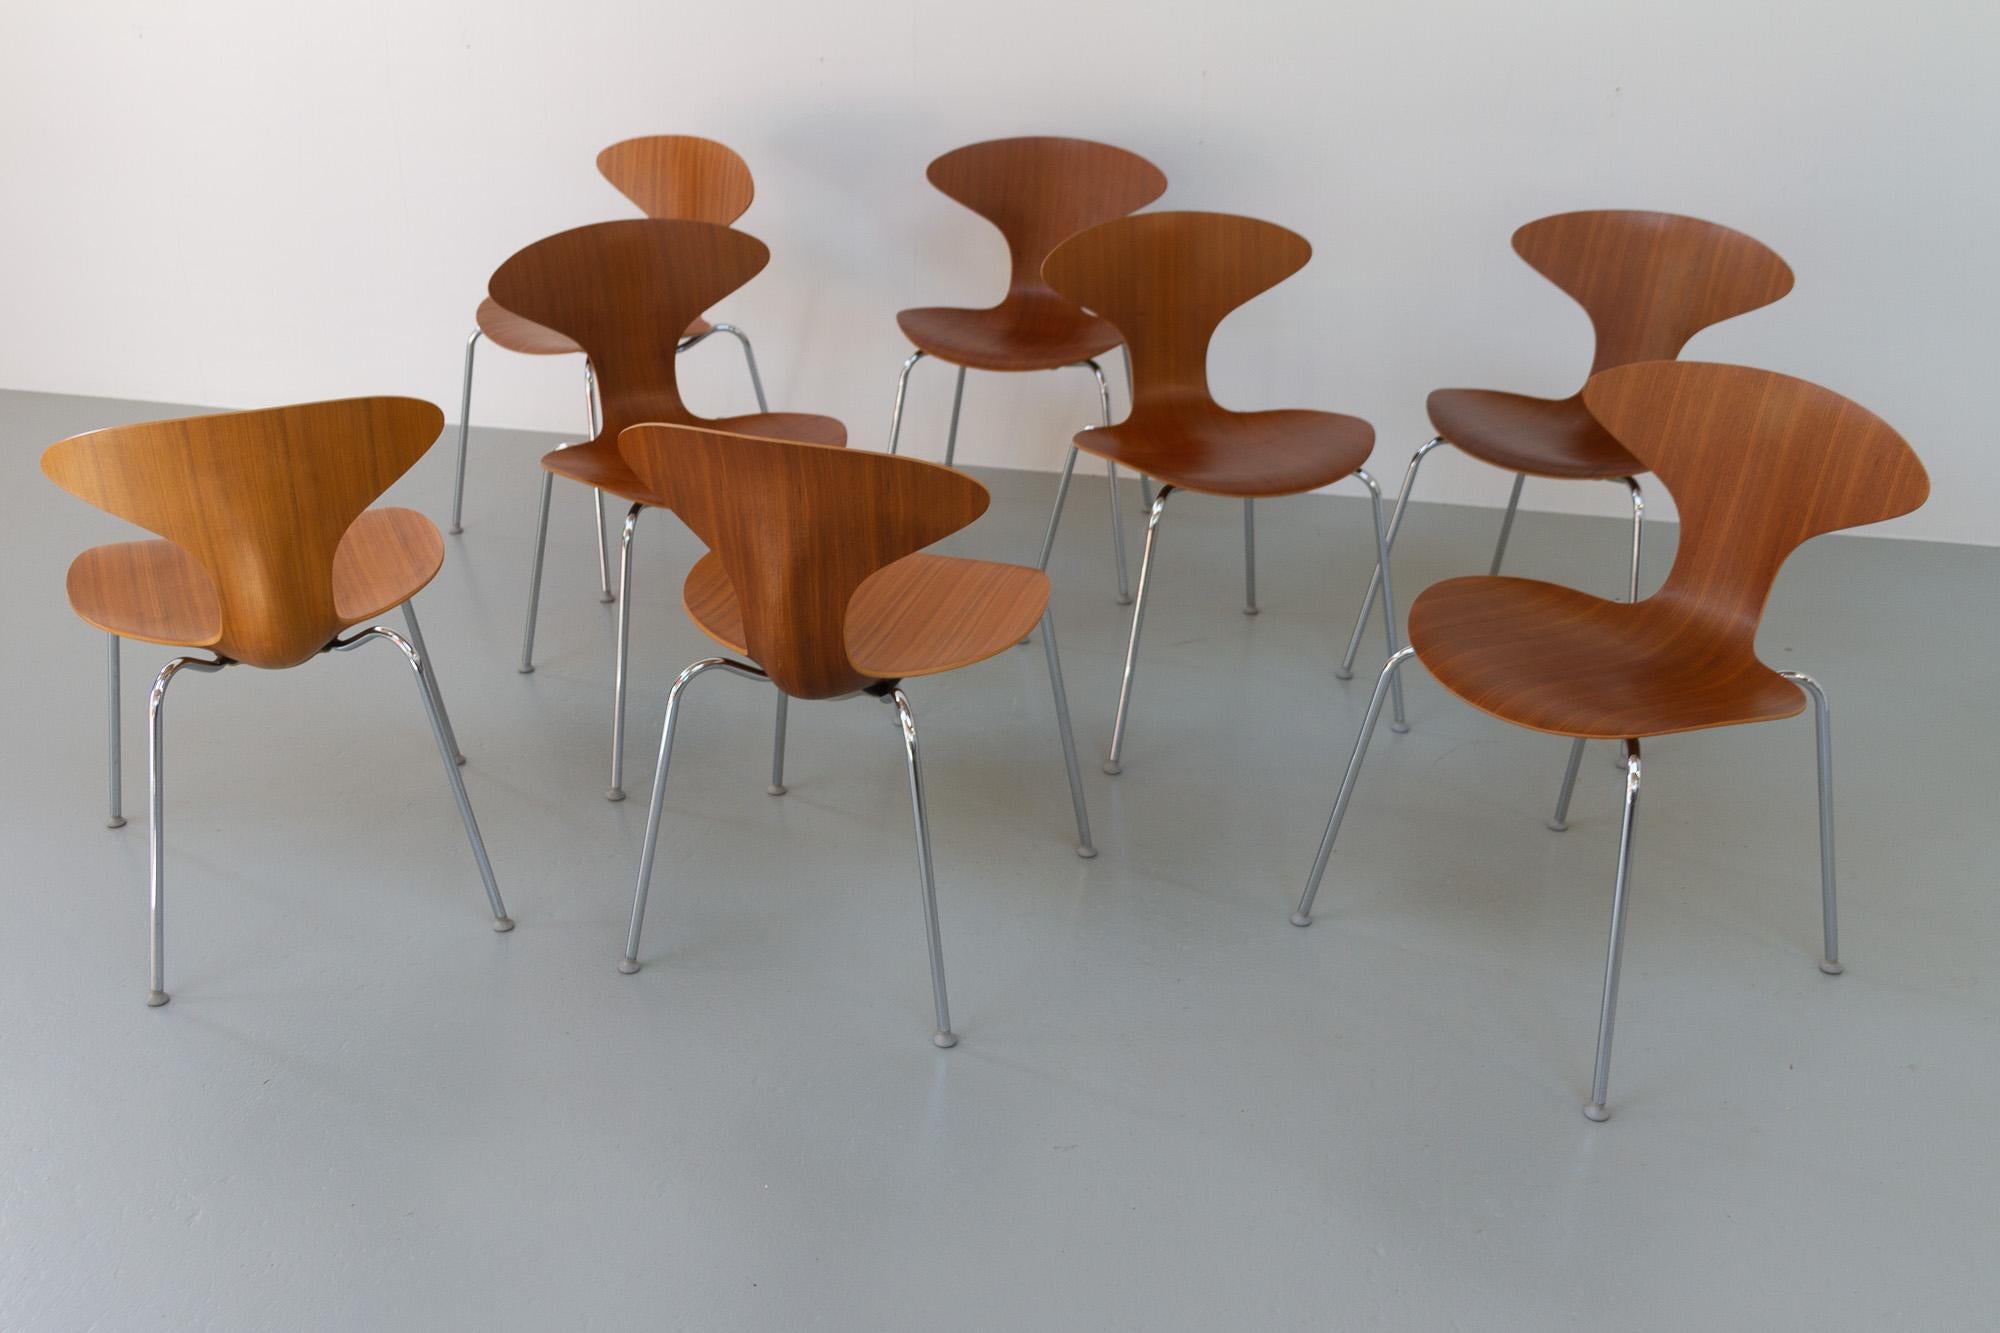 Walnut Orbit Dining Chairs by Ross Lovegrove for Bernhardt Design, Set of 8 In Good Condition For Sale In Asaa, DK